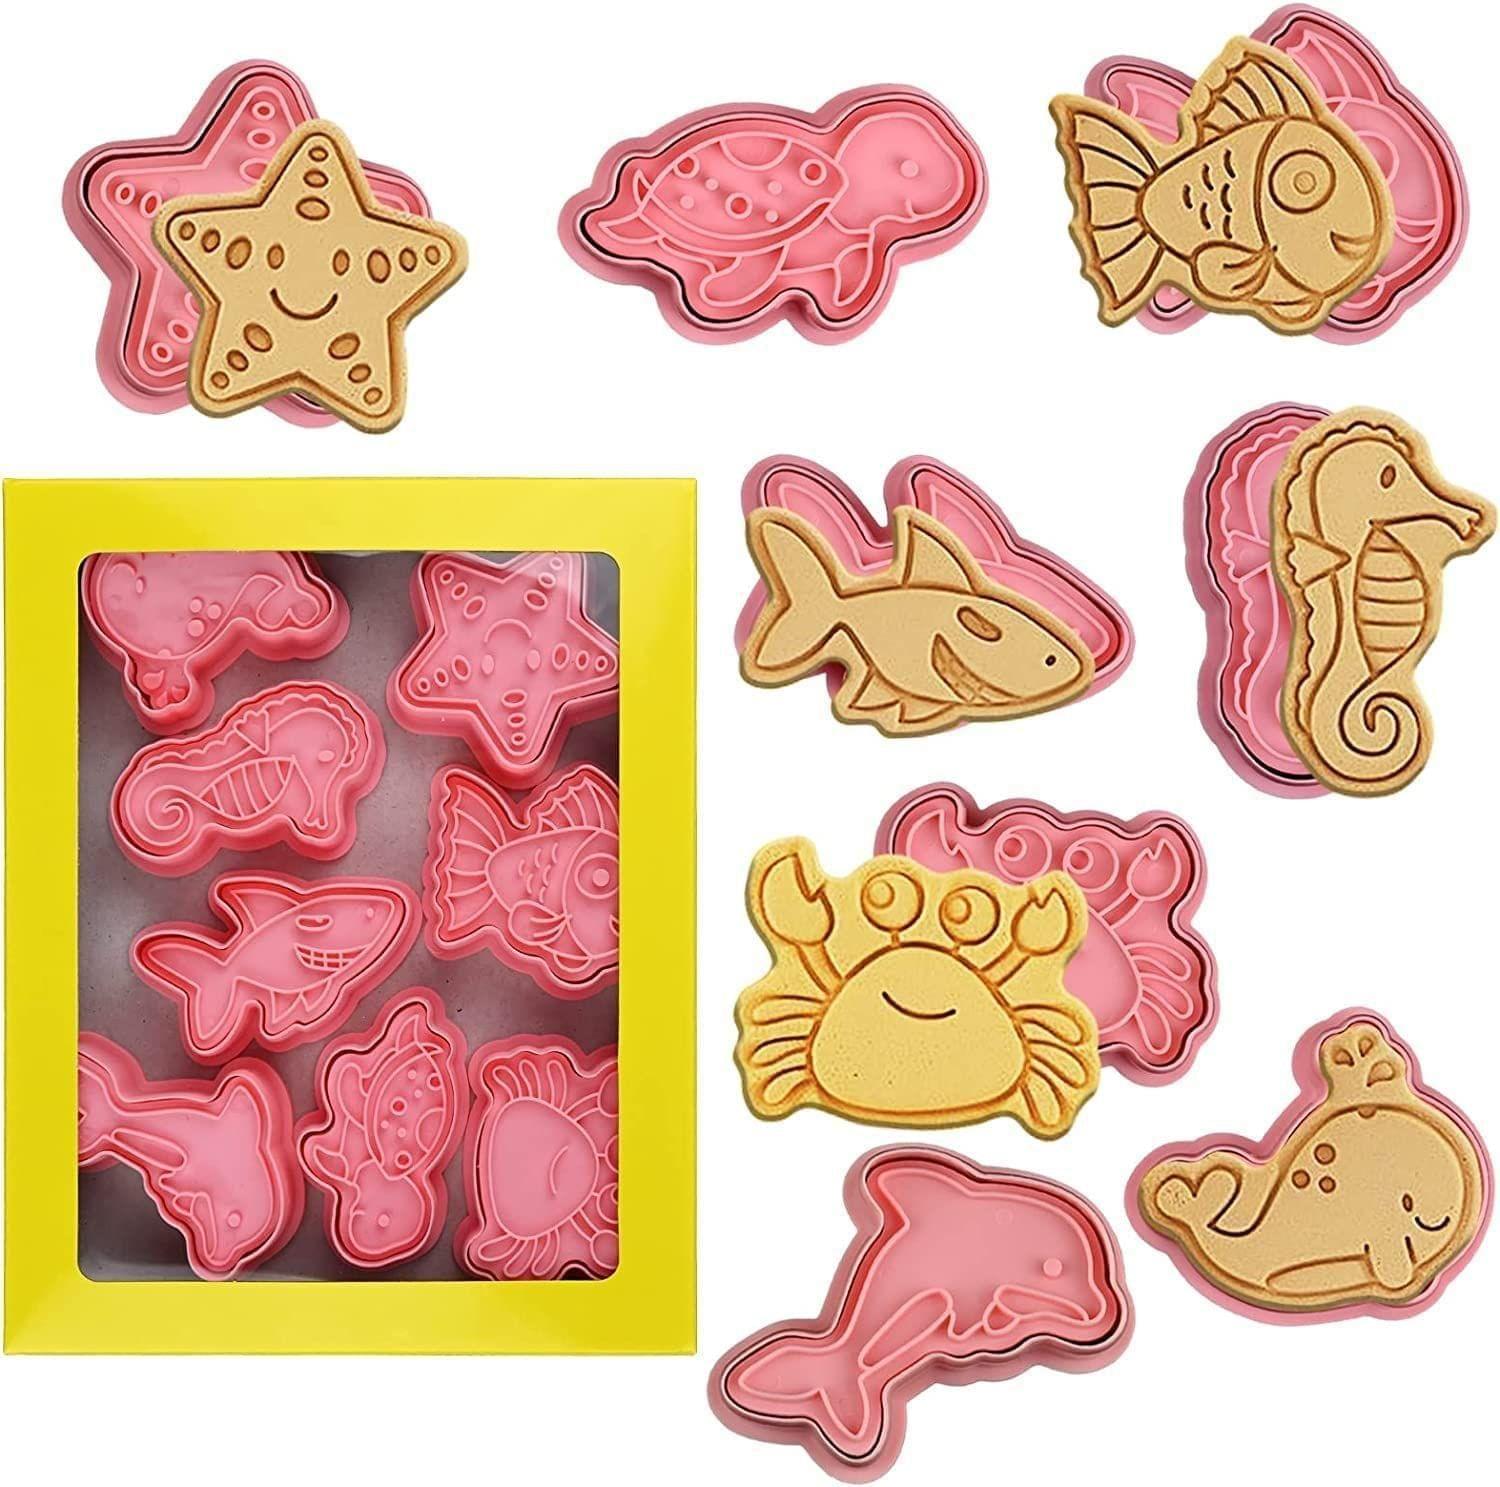 Skytail Ocean Cookie Cutters with Plunger Stamps - 8 Piece Set